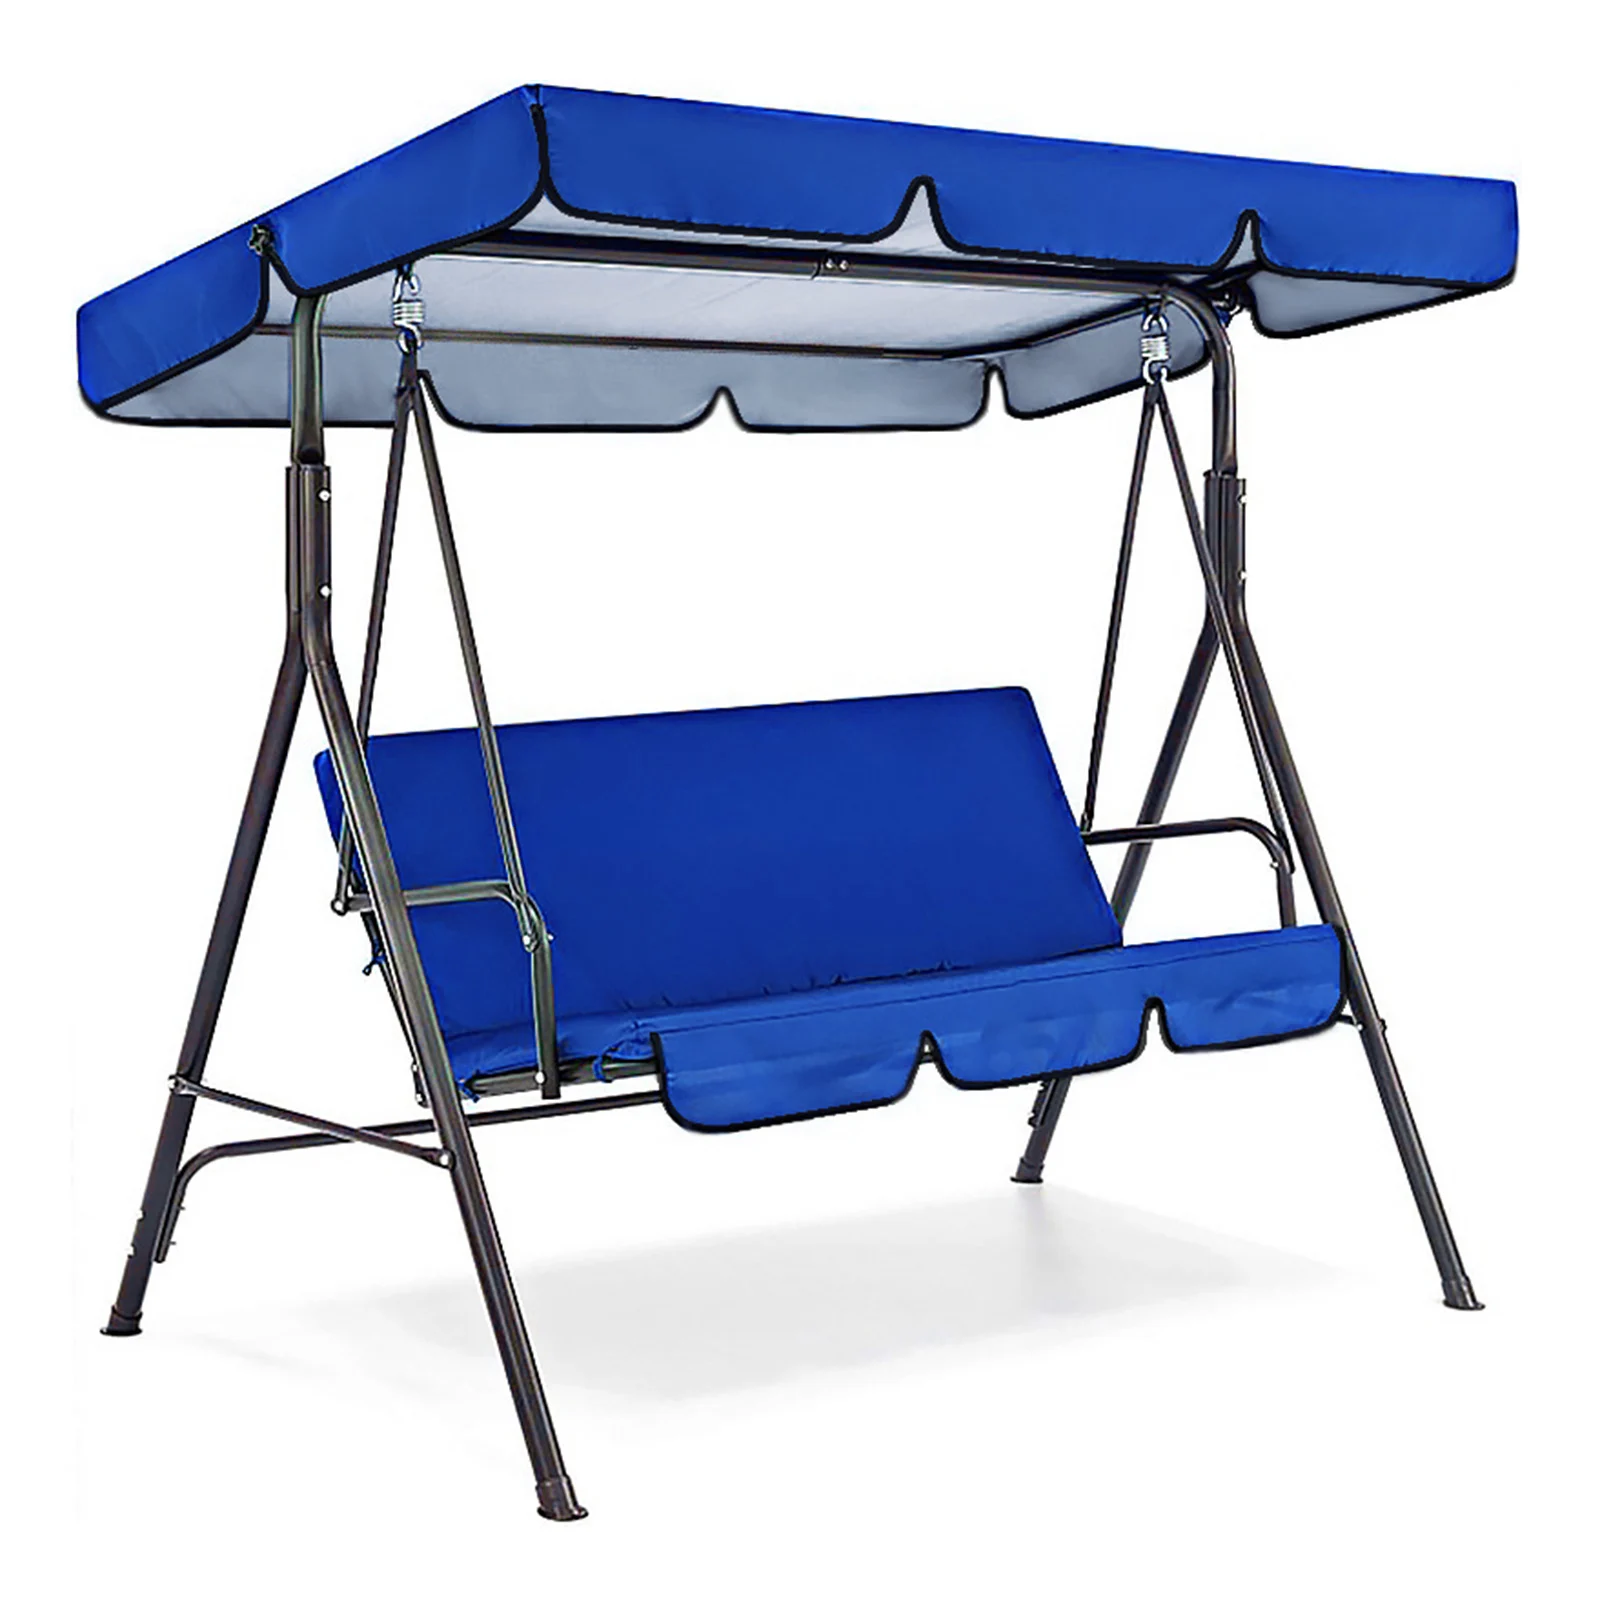 Swing Awning Set 3 Seat Swing Canopies Seat Cover Protector Waterproof